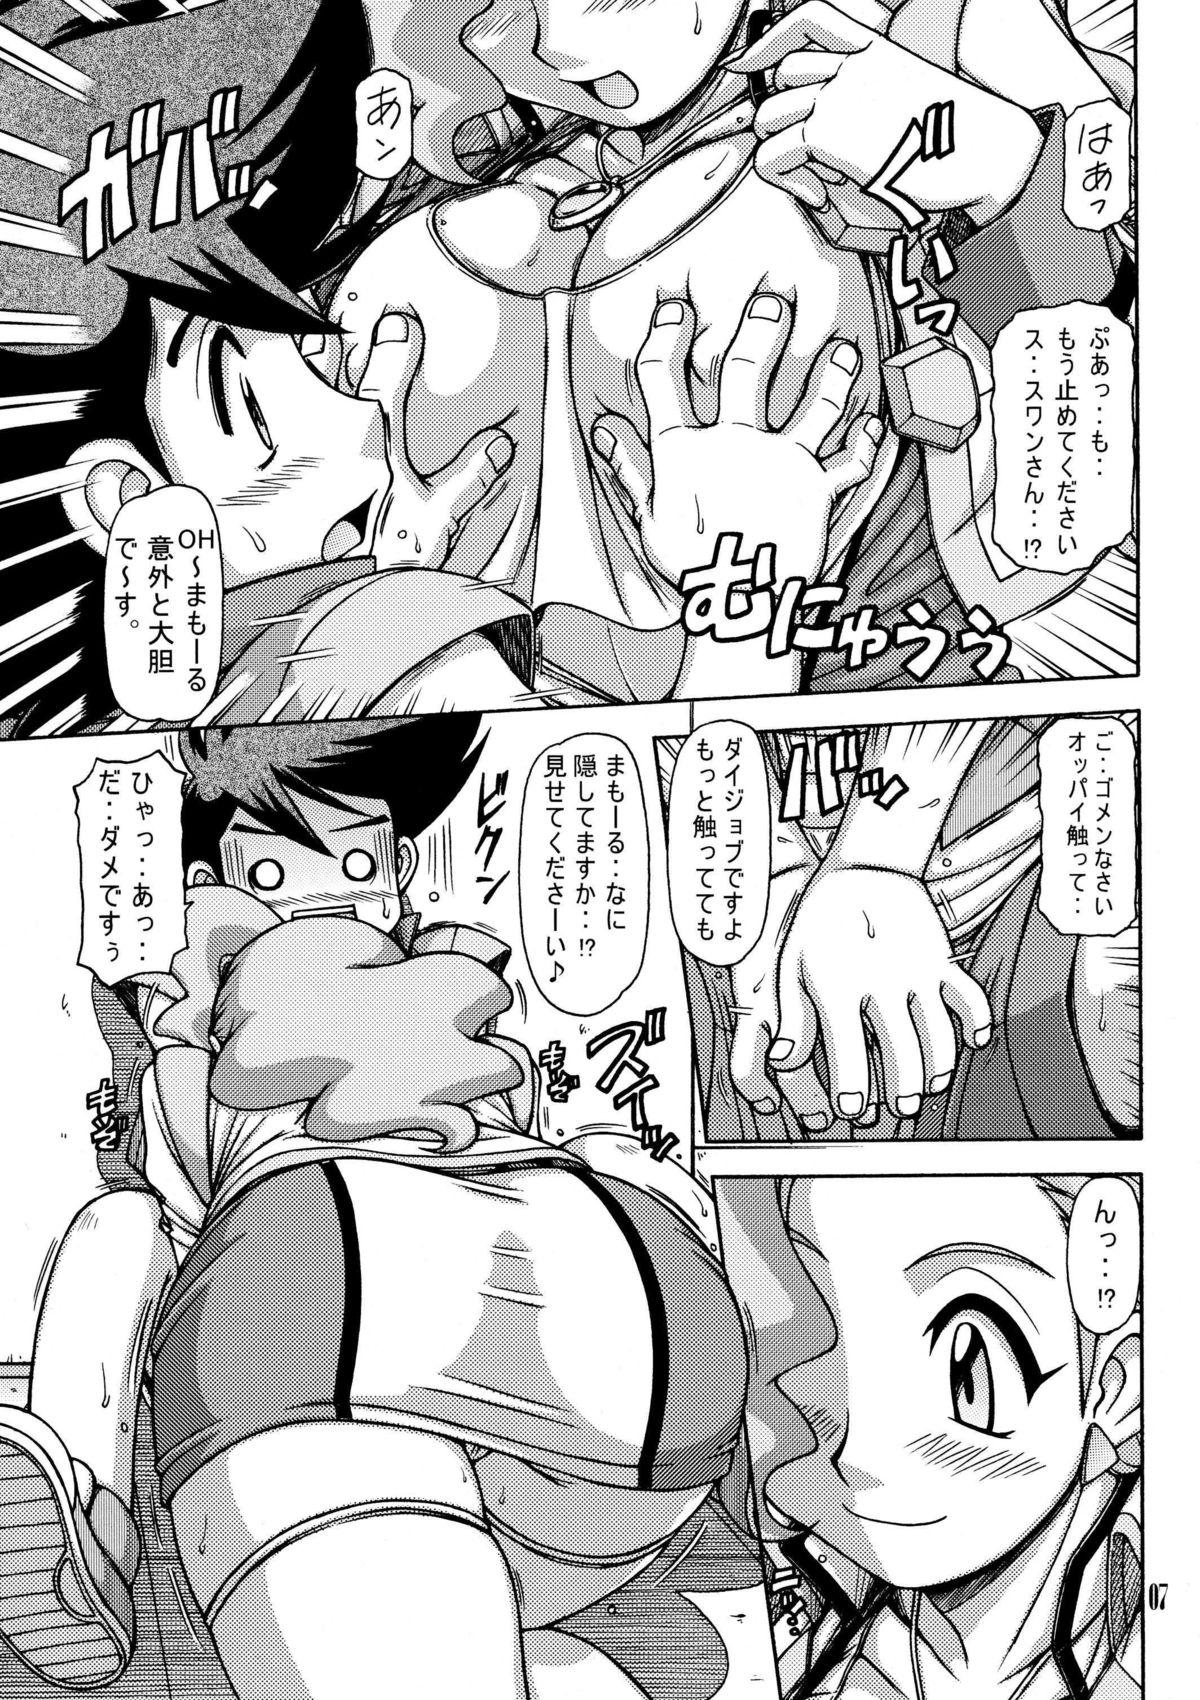 Young Men Red Muffler GGG - Gaogaigar Horny - Page 6